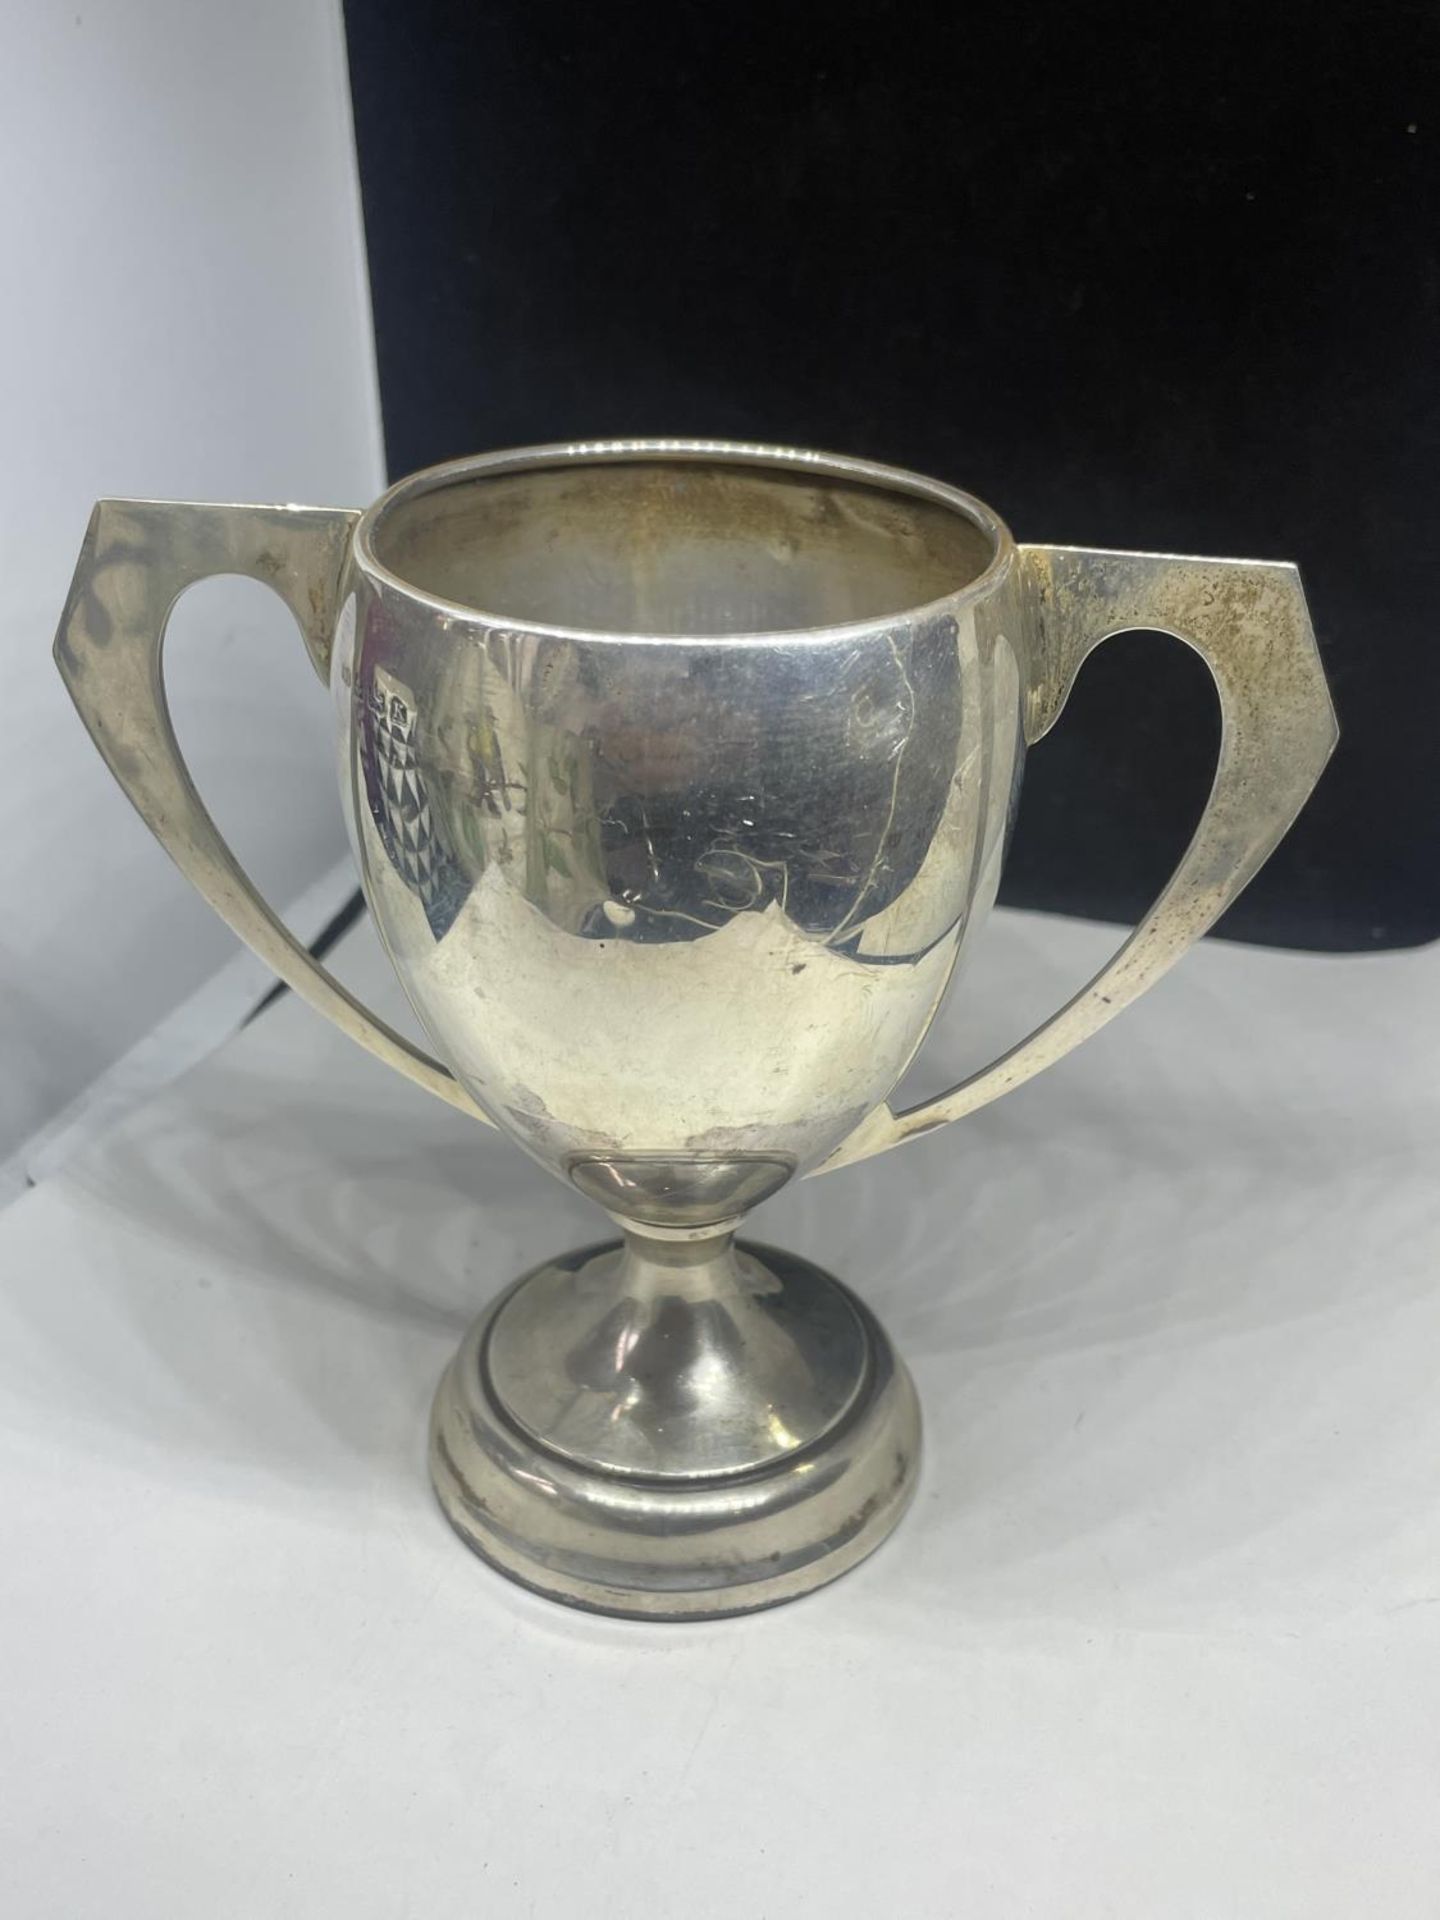 A HALLMARKED BIRMINGHAM SILVER TWIN HANDLED CUP GROSS WEIGHT 140.5 GRAMS - Image 3 of 4